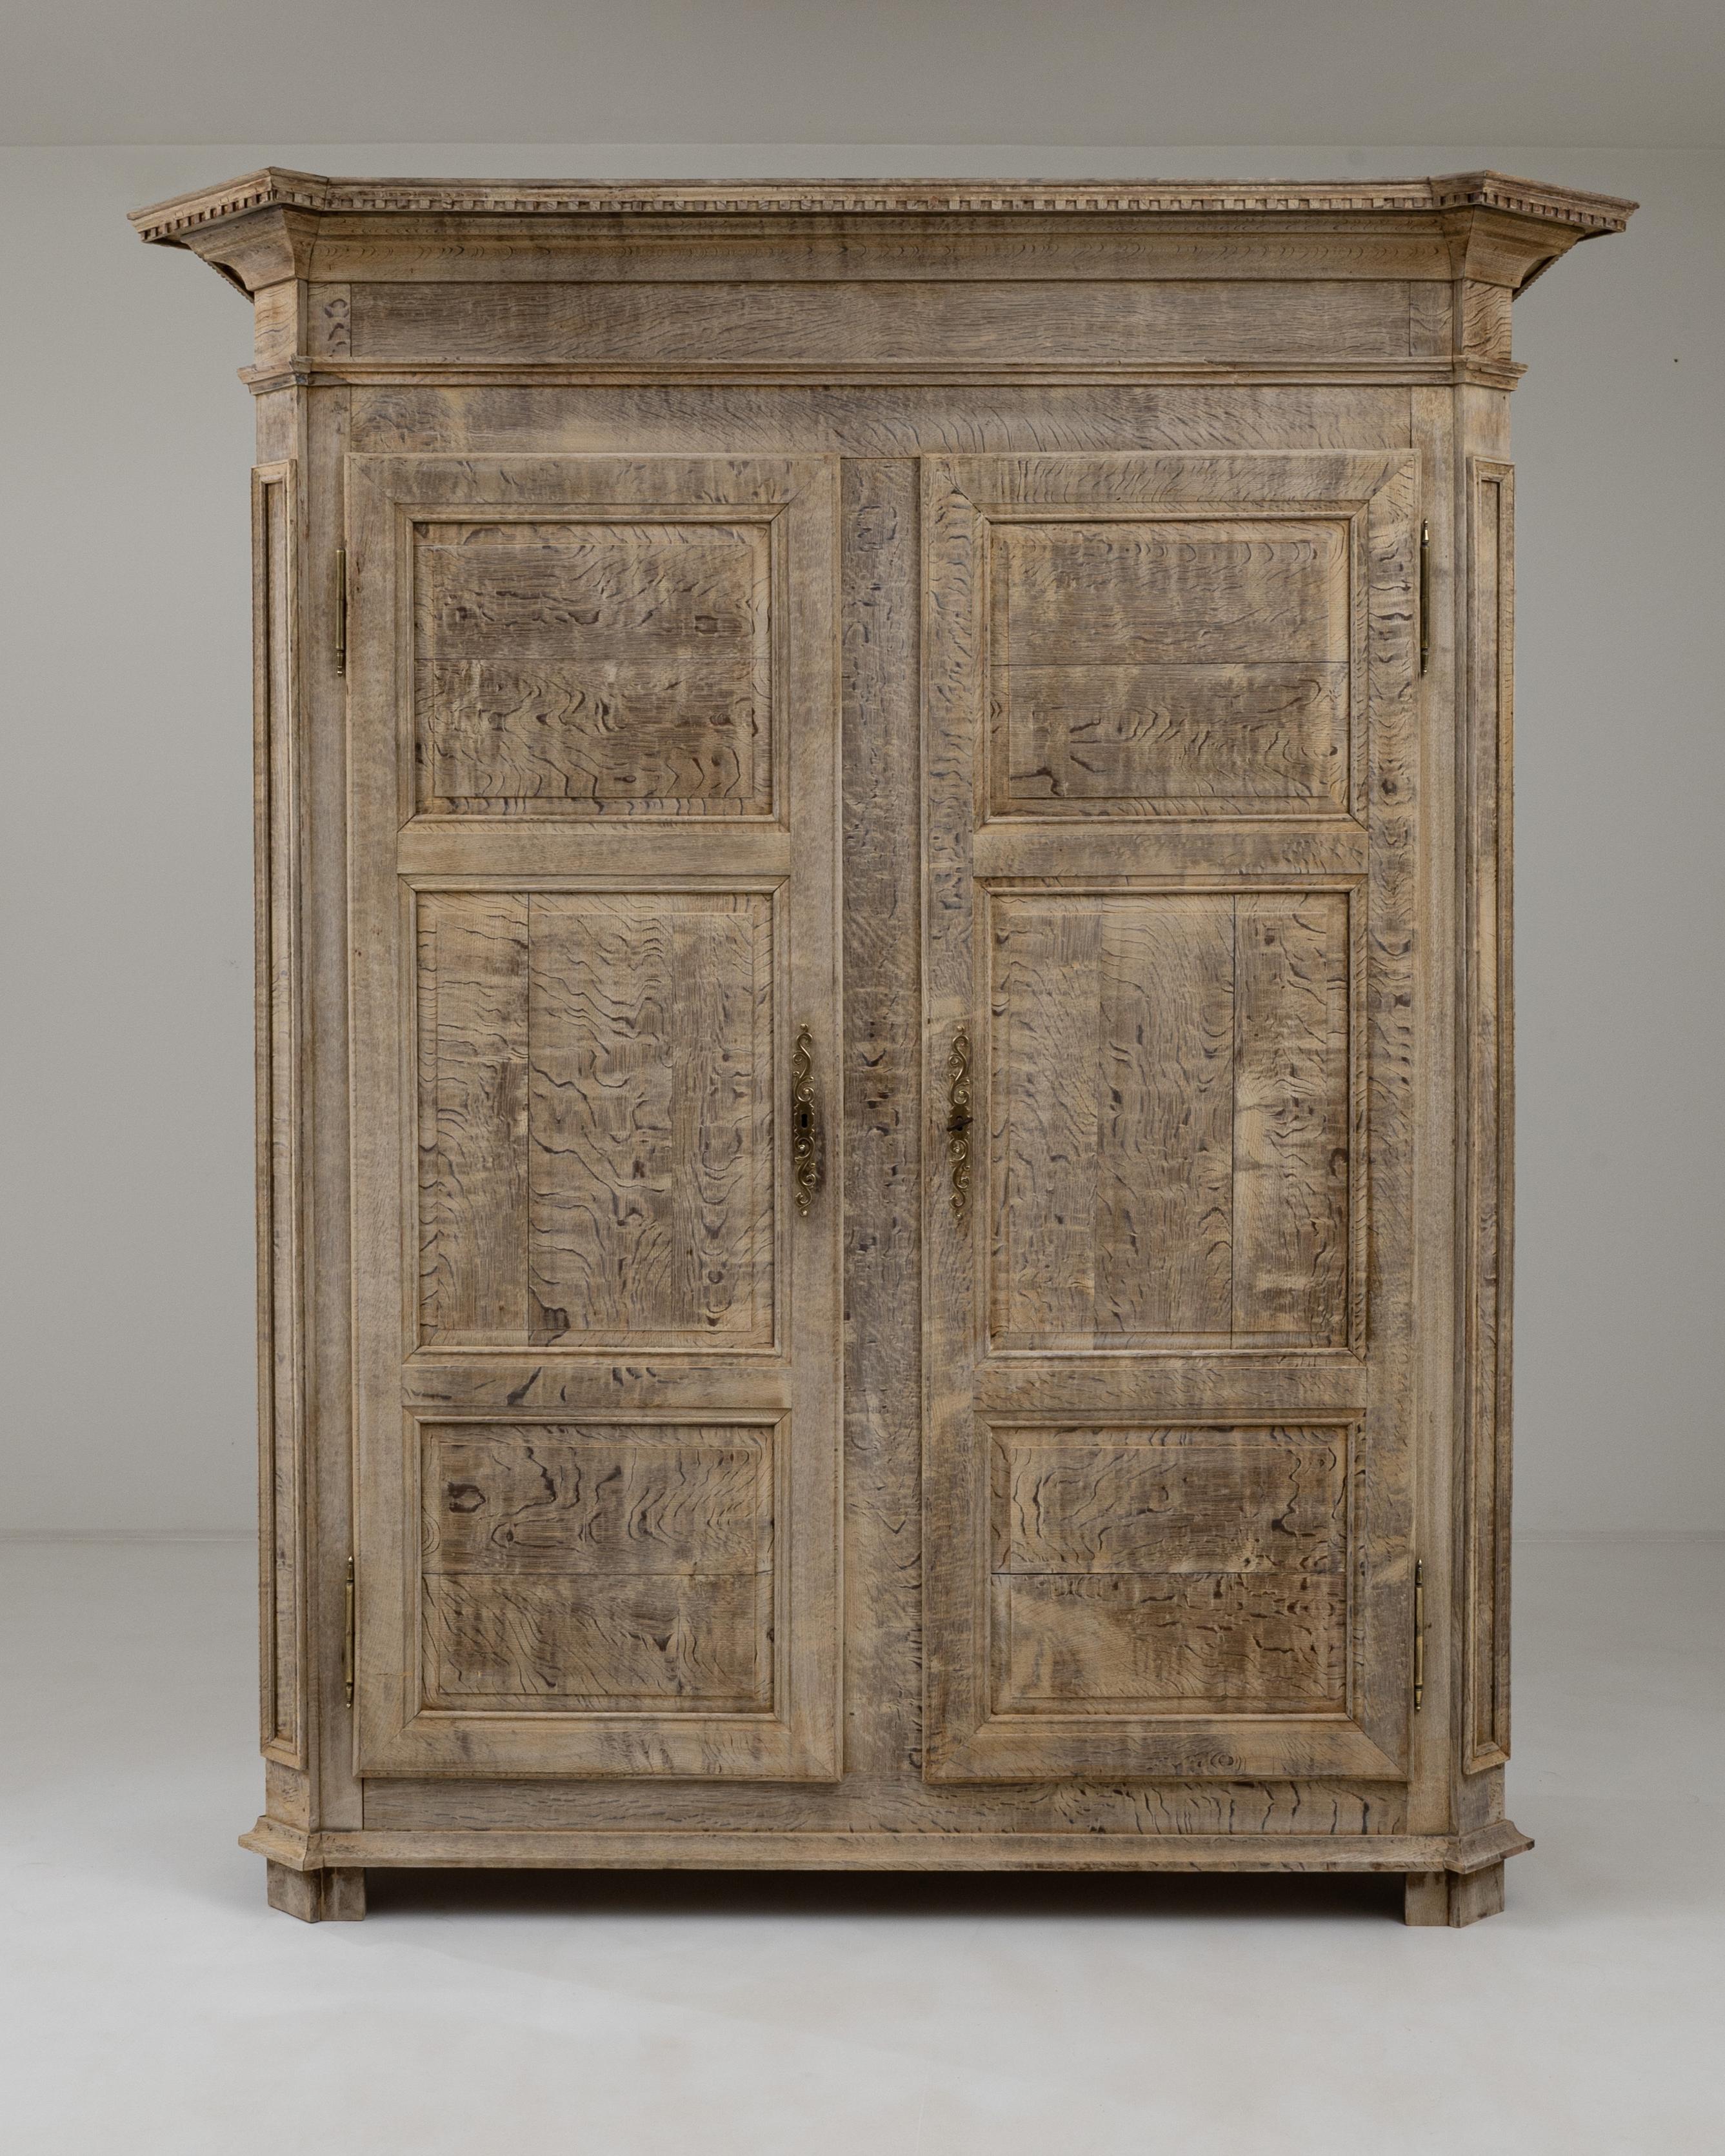 The commanding presence of this 19th-century Belgian cabinet is accentuated by its gracefully molded cornice, adorned with carved decorative elements along its edges. The panel doors and beveled corners contribute to its balanced symmetry, revealing